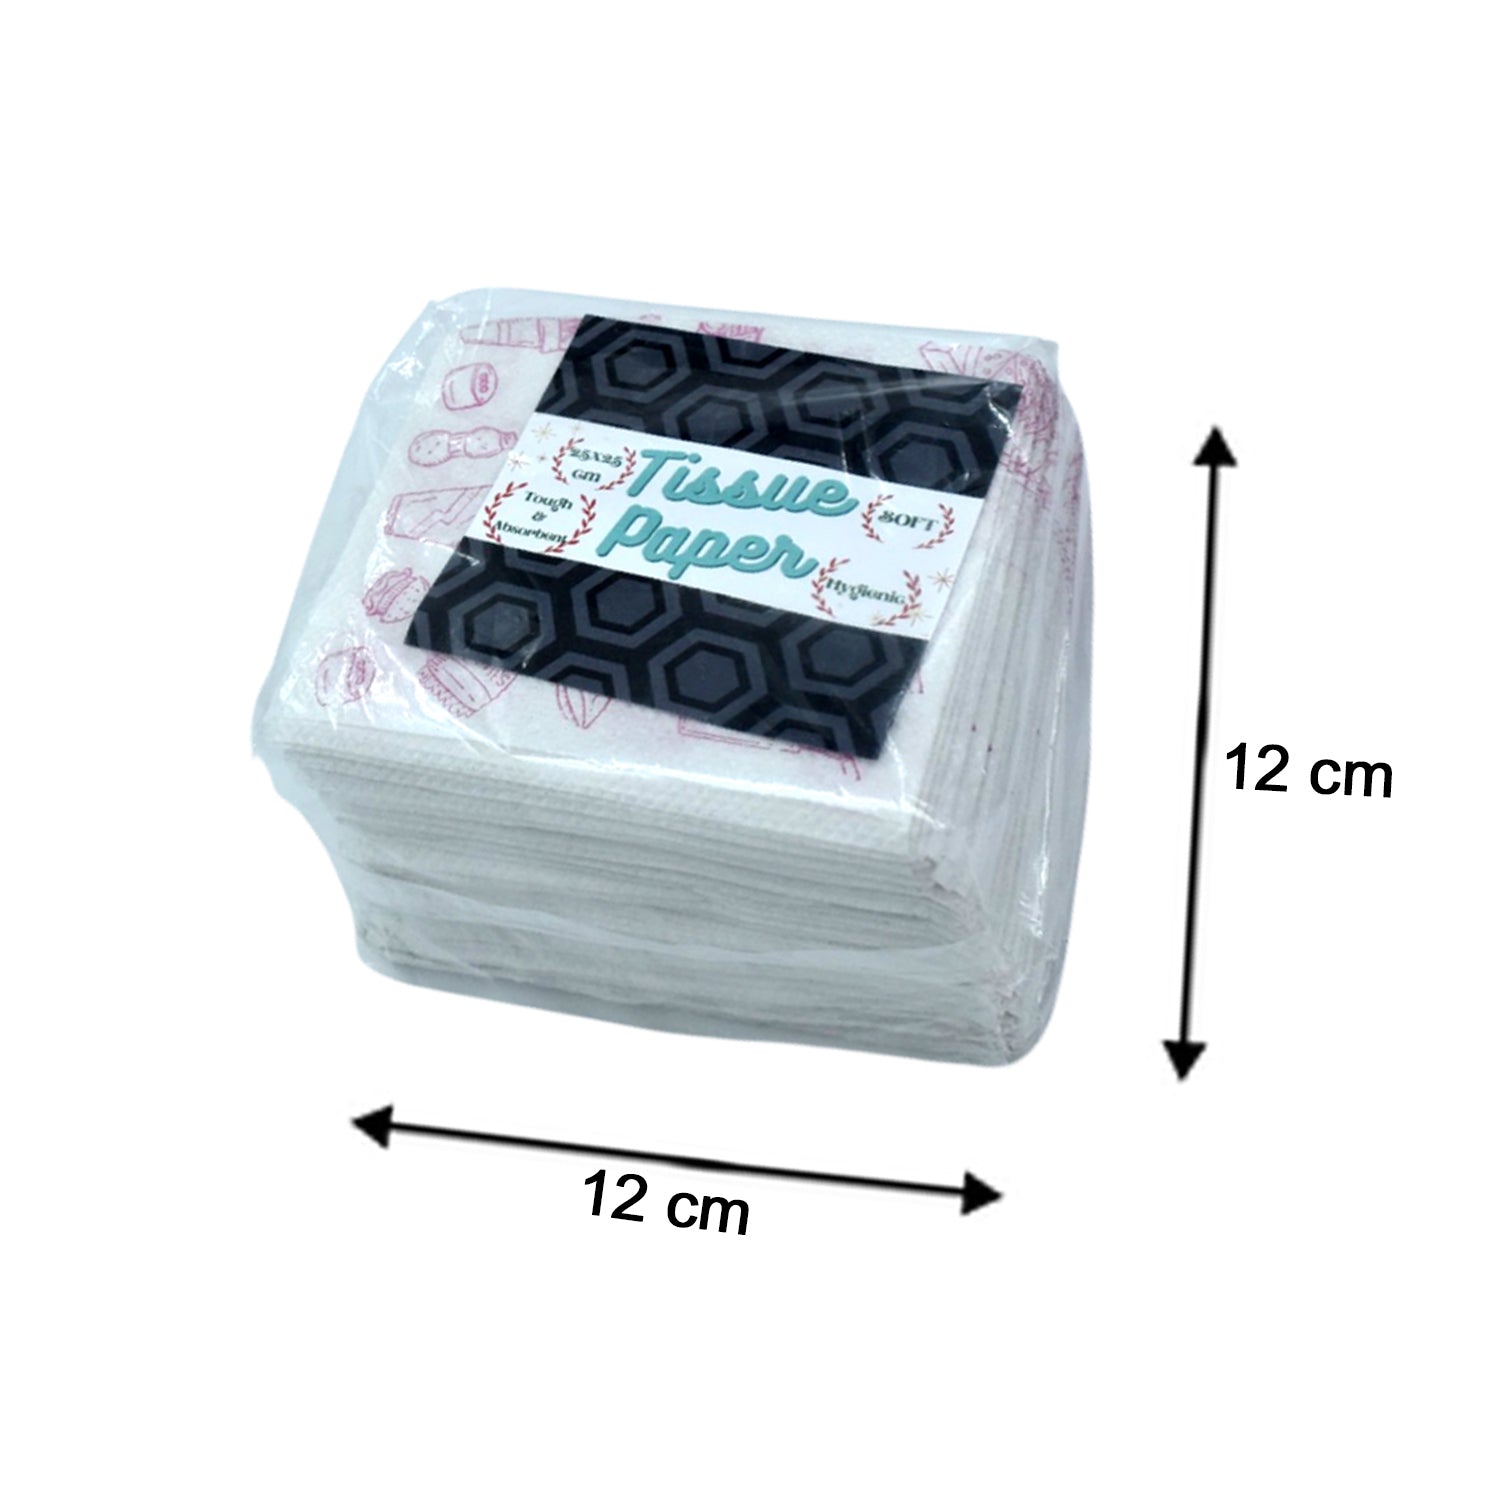 6221 Tissue Paper For Wiping And Cleaning Purposes Of Types Of Things. DeoDap